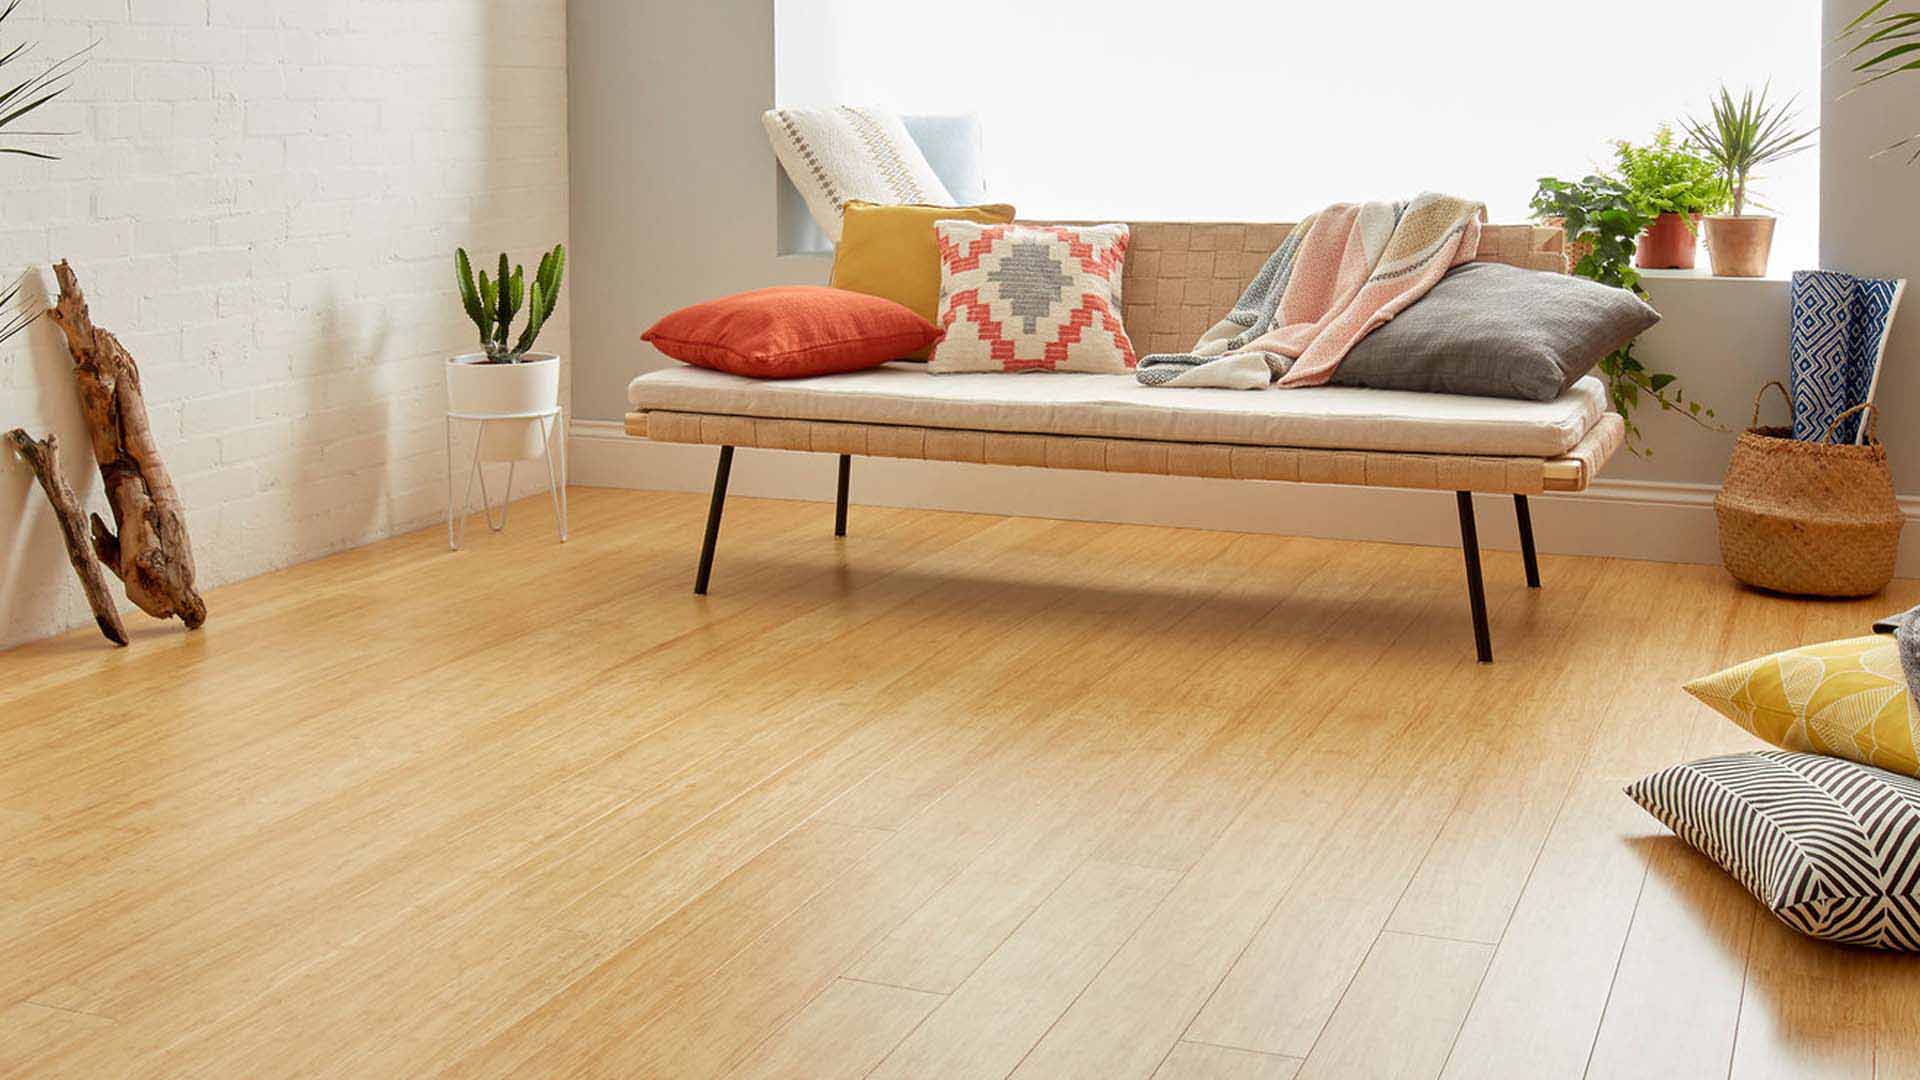 Bamboo Flooring Review Pros Cons, Bamboo Flooring Vs Hardwood Pros And Cons